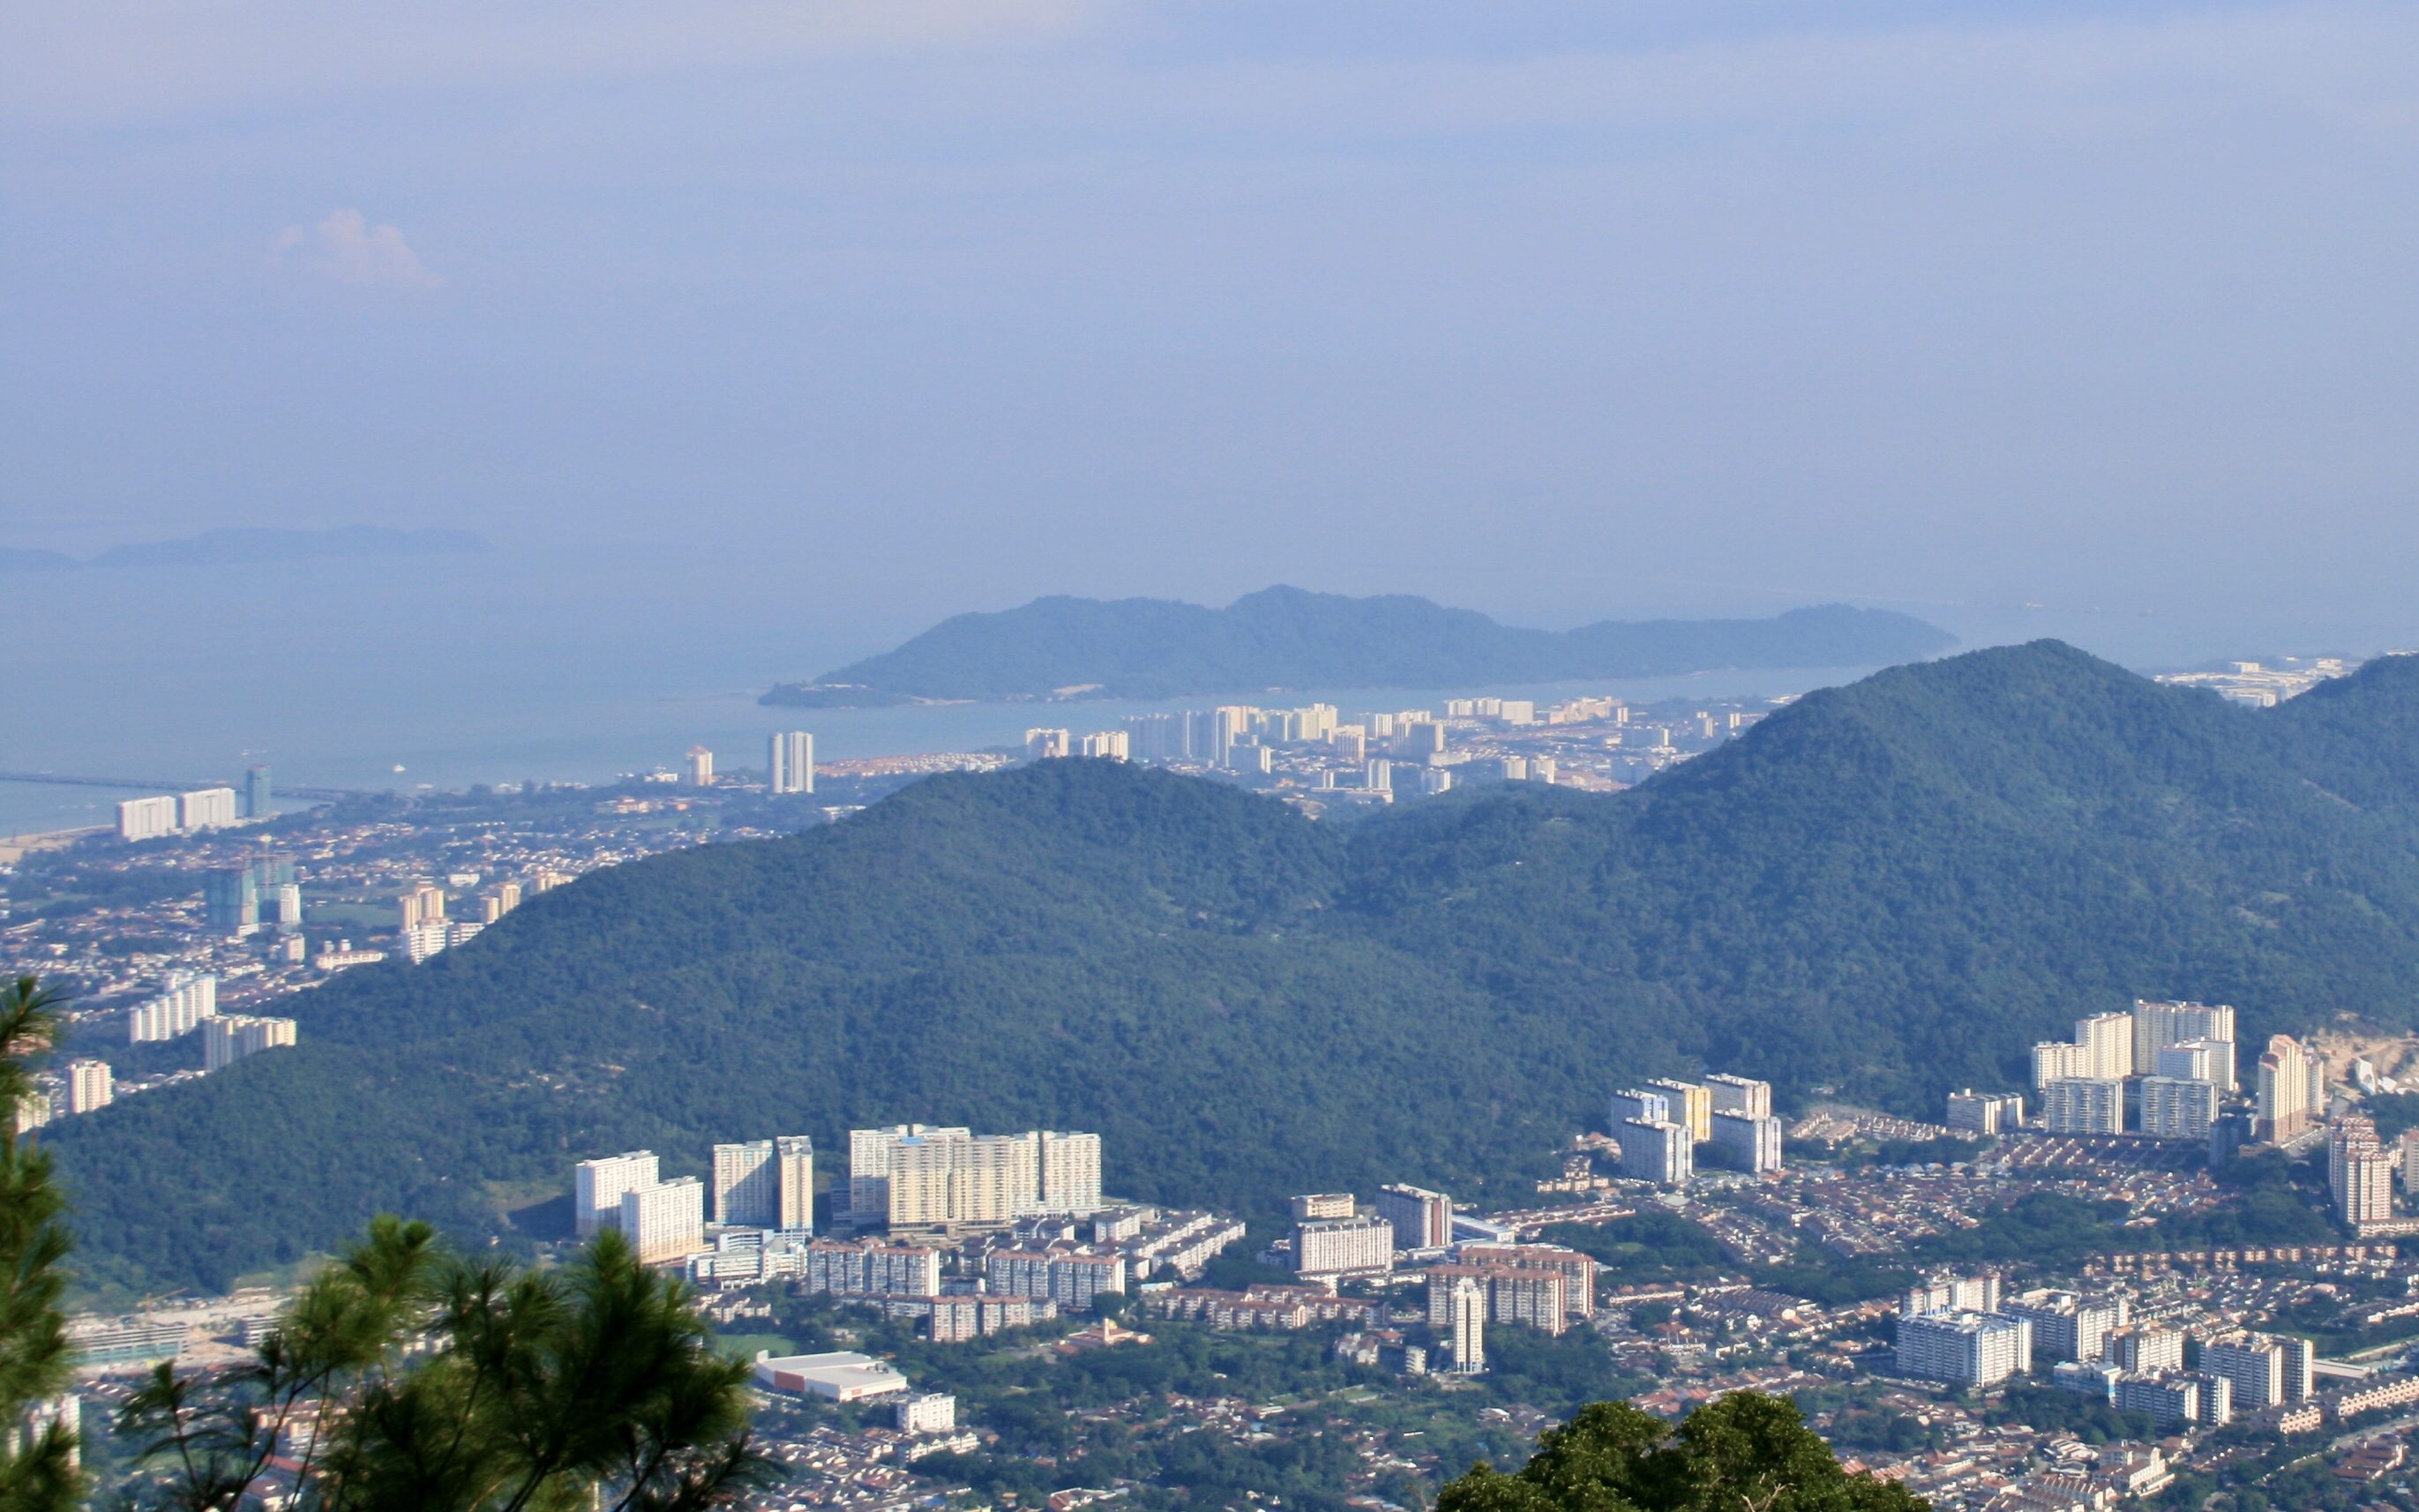 View on the northern part of Penang Island, taken from Penang Hill